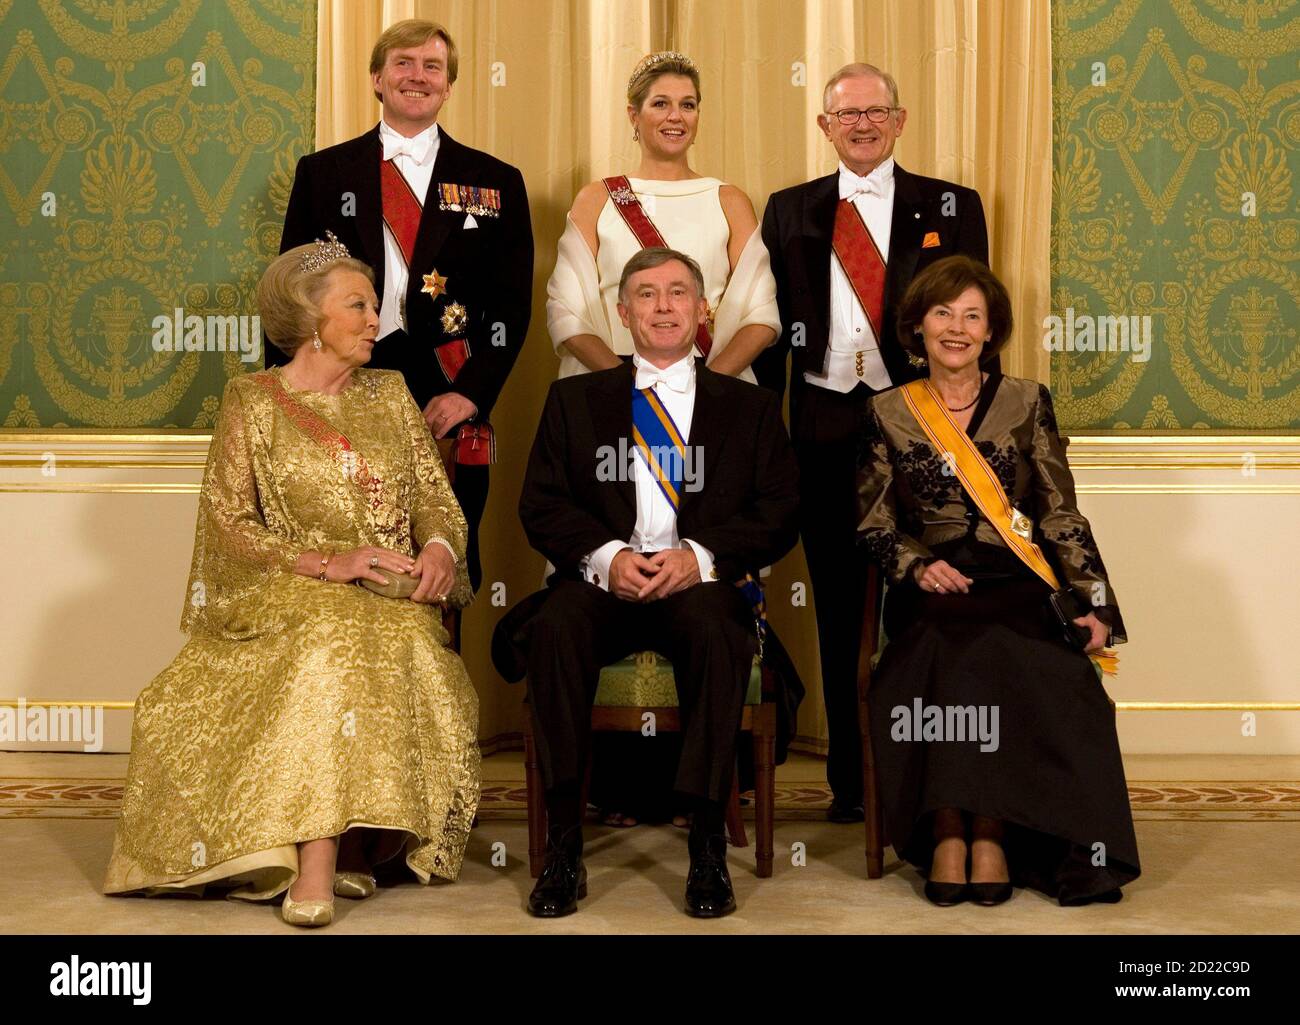 From bottom L) Dutch Queen Beatrix, German President Horst Koehler and his  wife, (from top L) Crown Prince Willem Alexander, his wife Crown Princess  Maxima and Mr. Piter van Vollenhoven pose for